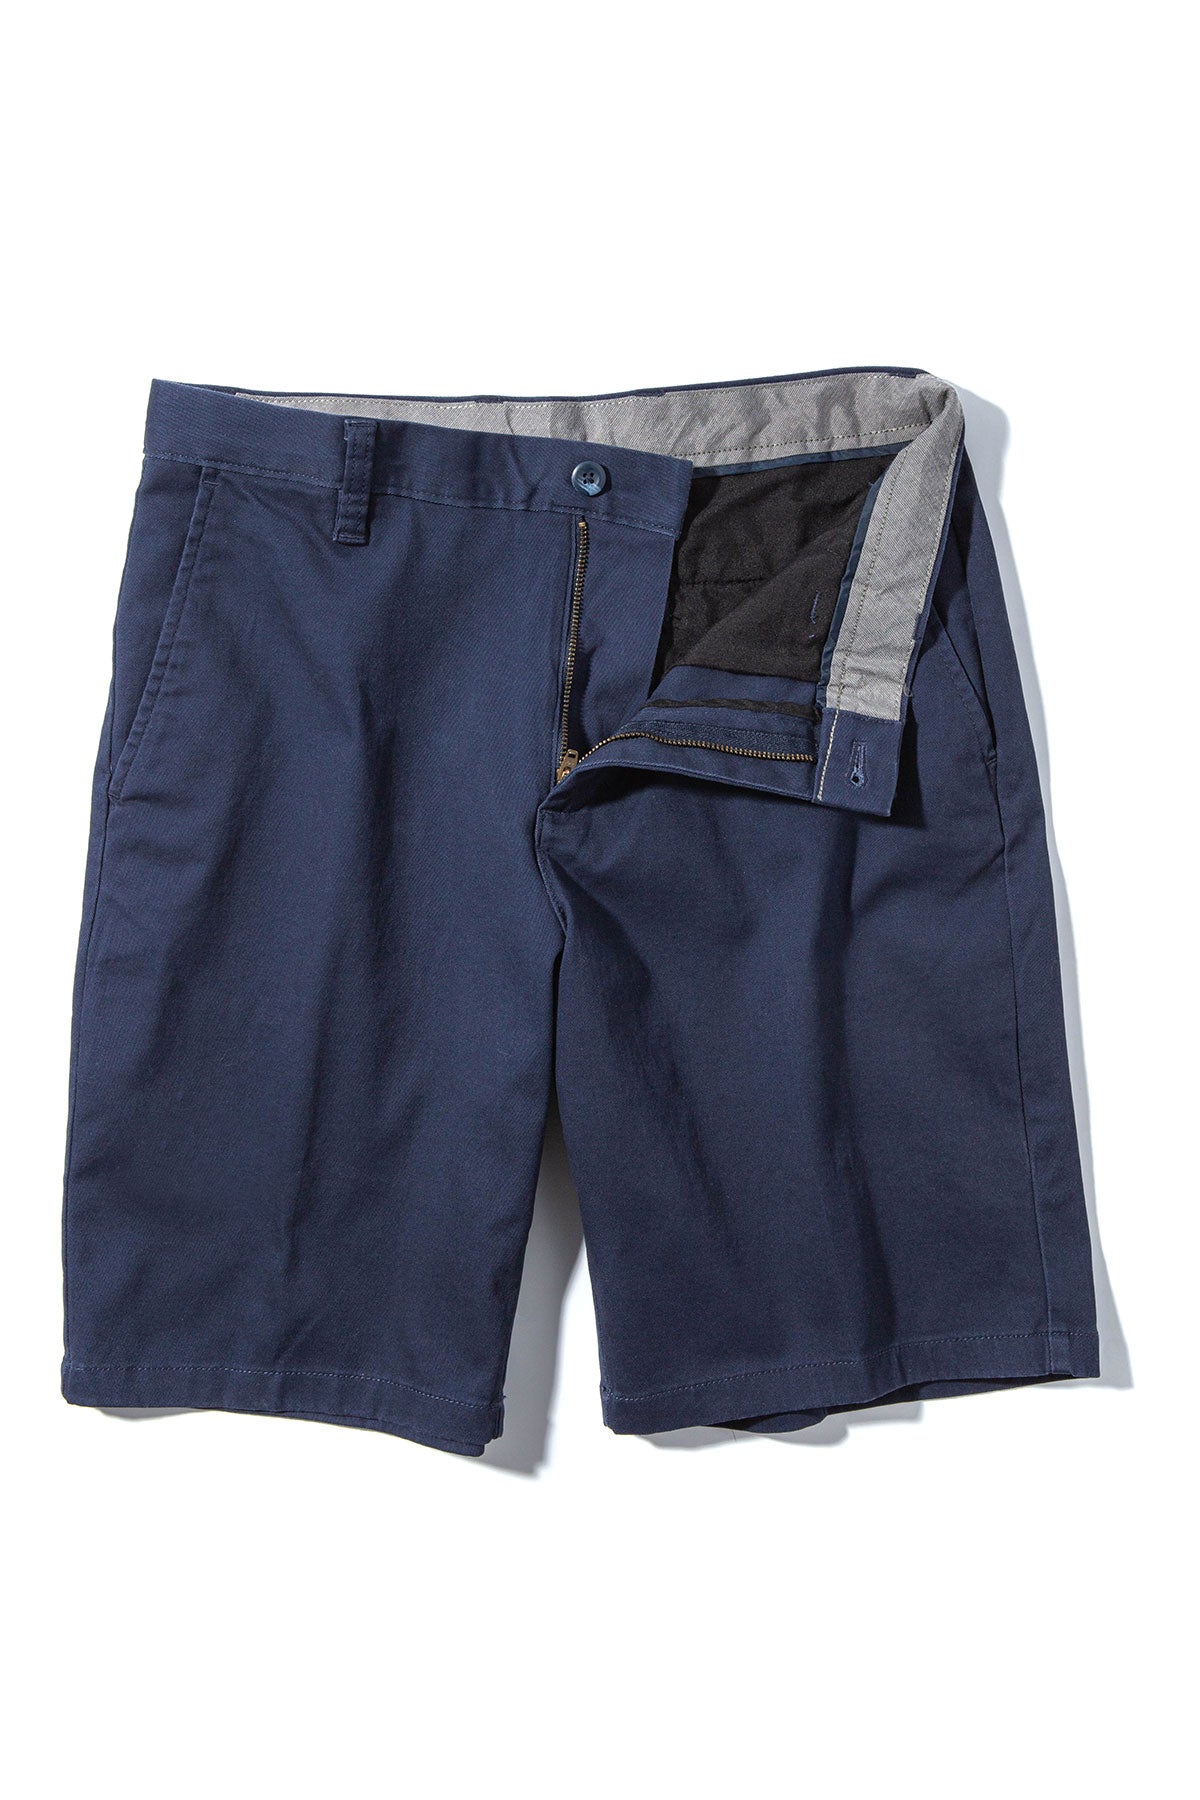 Rockport 9" Stretch Cotton Shorts in Navy | Mens - Shorts | Georg Roth